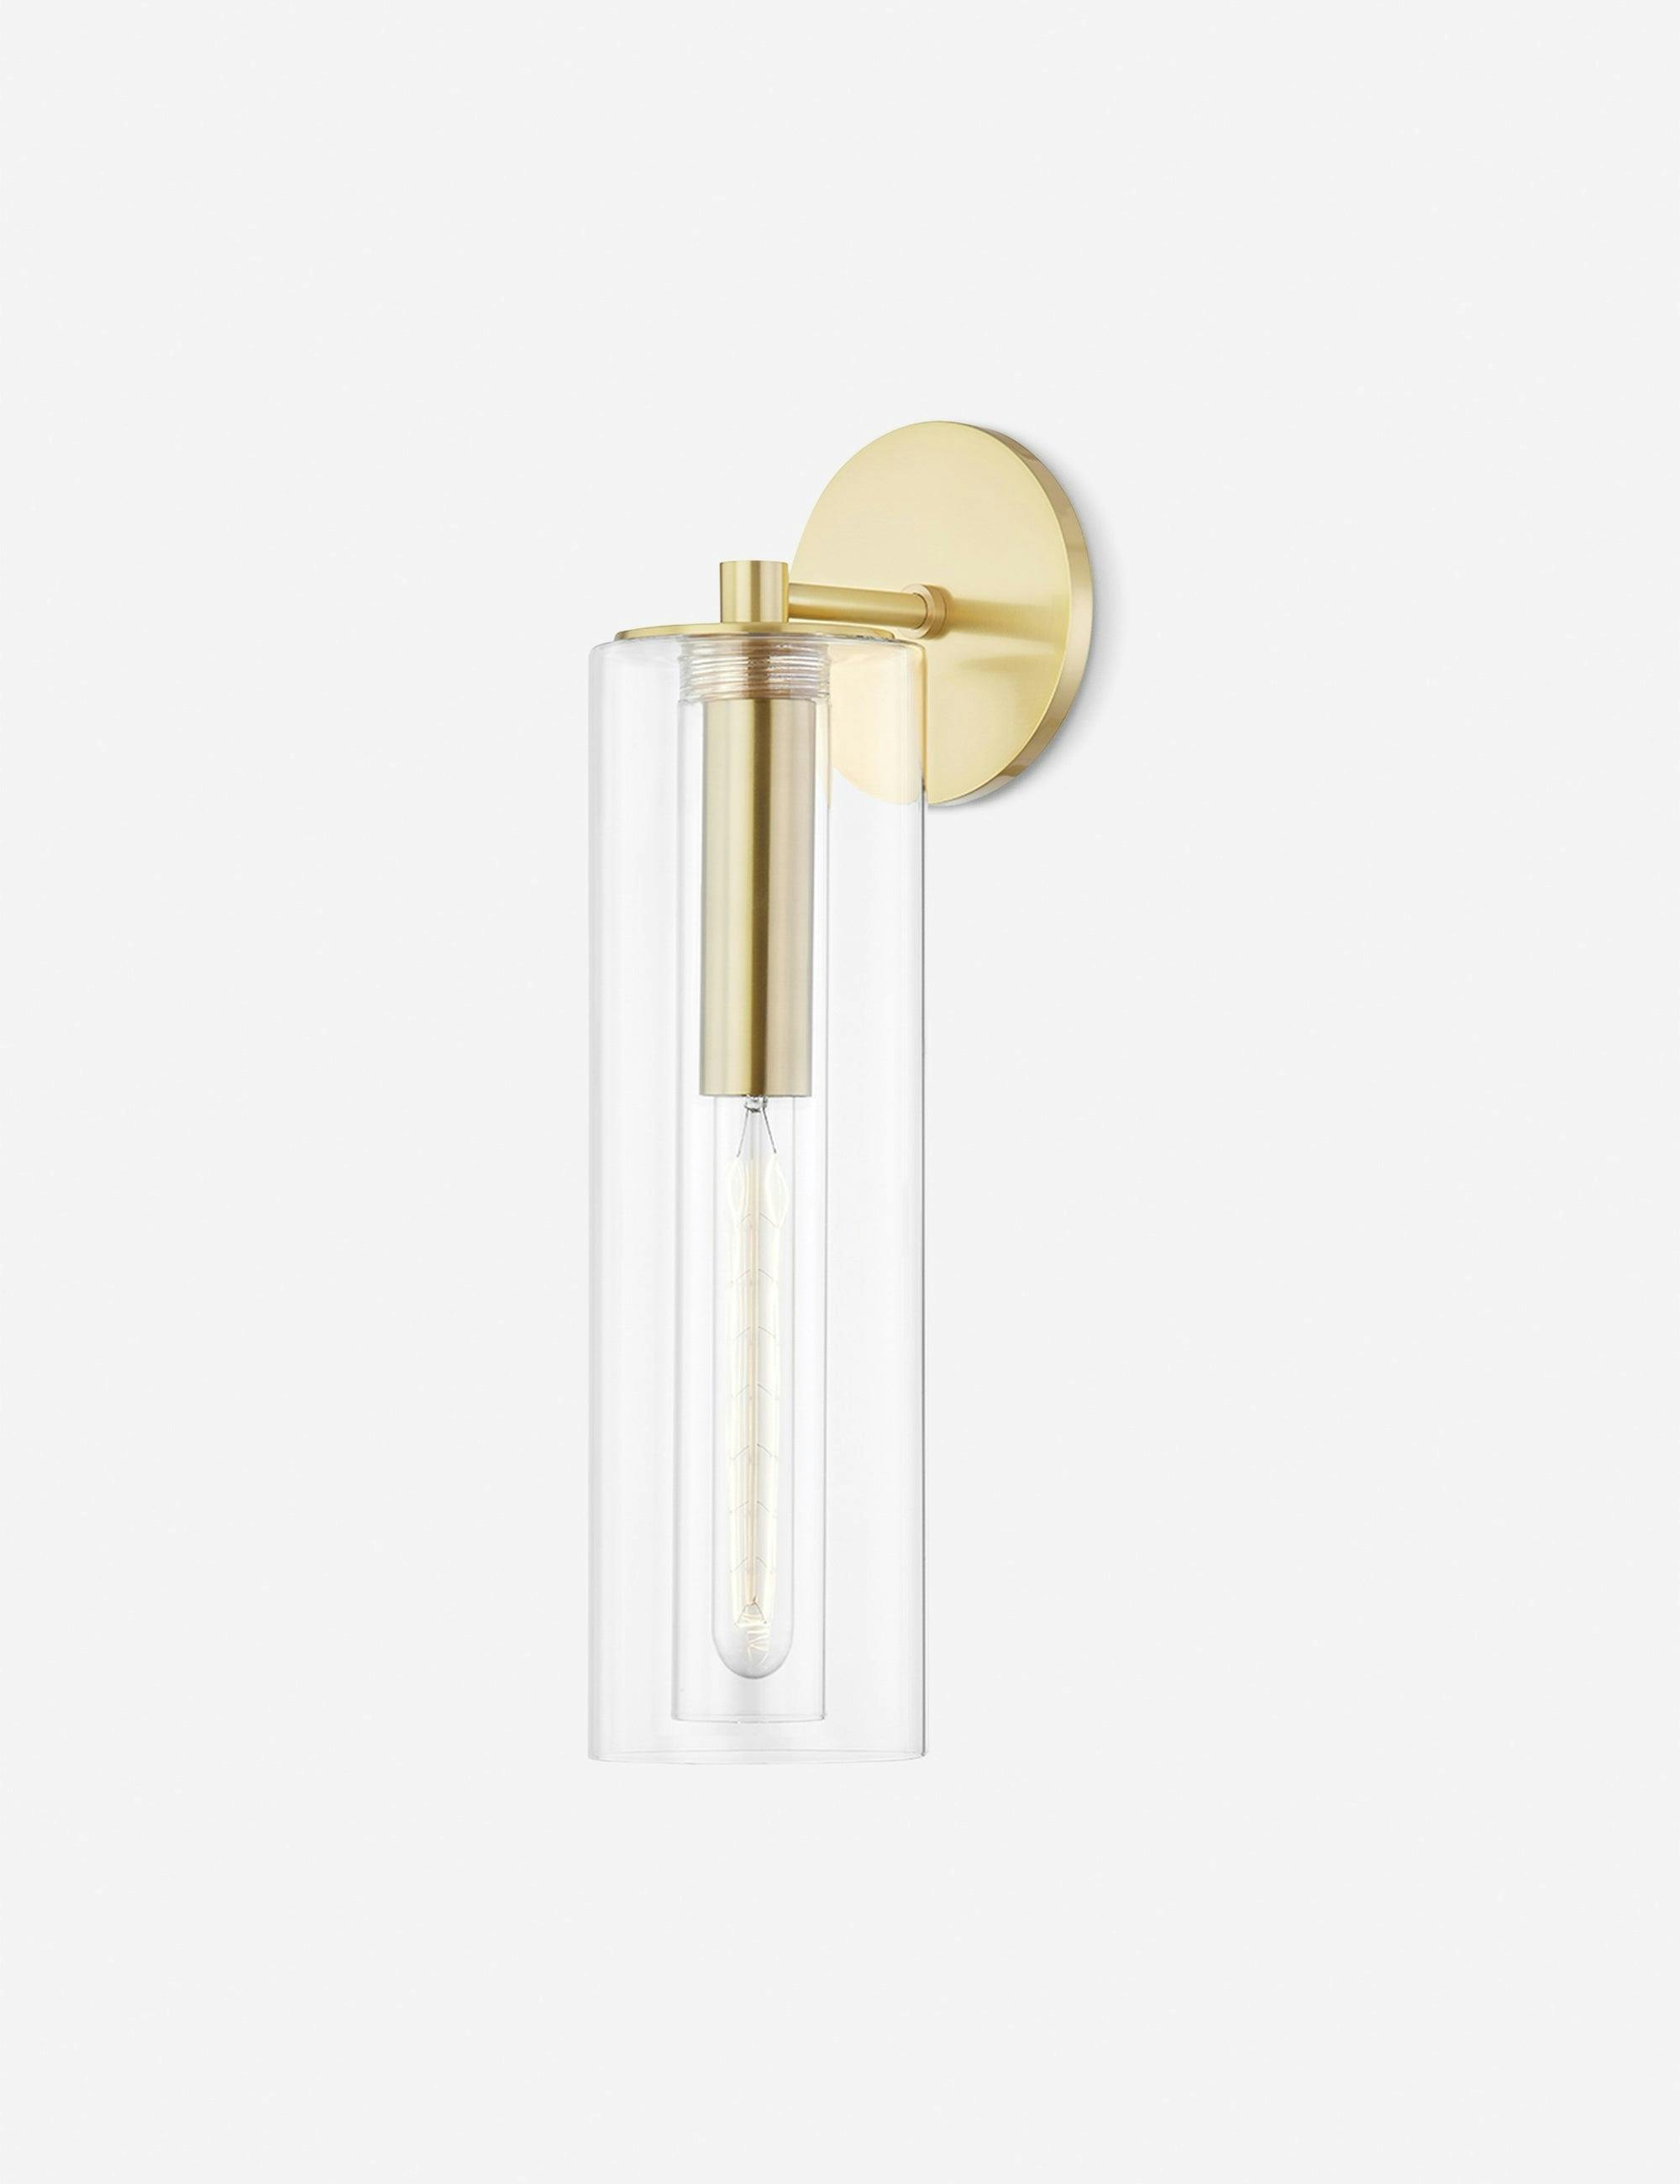 Elegant Aged Brass Cylinder Sconce with Clear Glass Shade